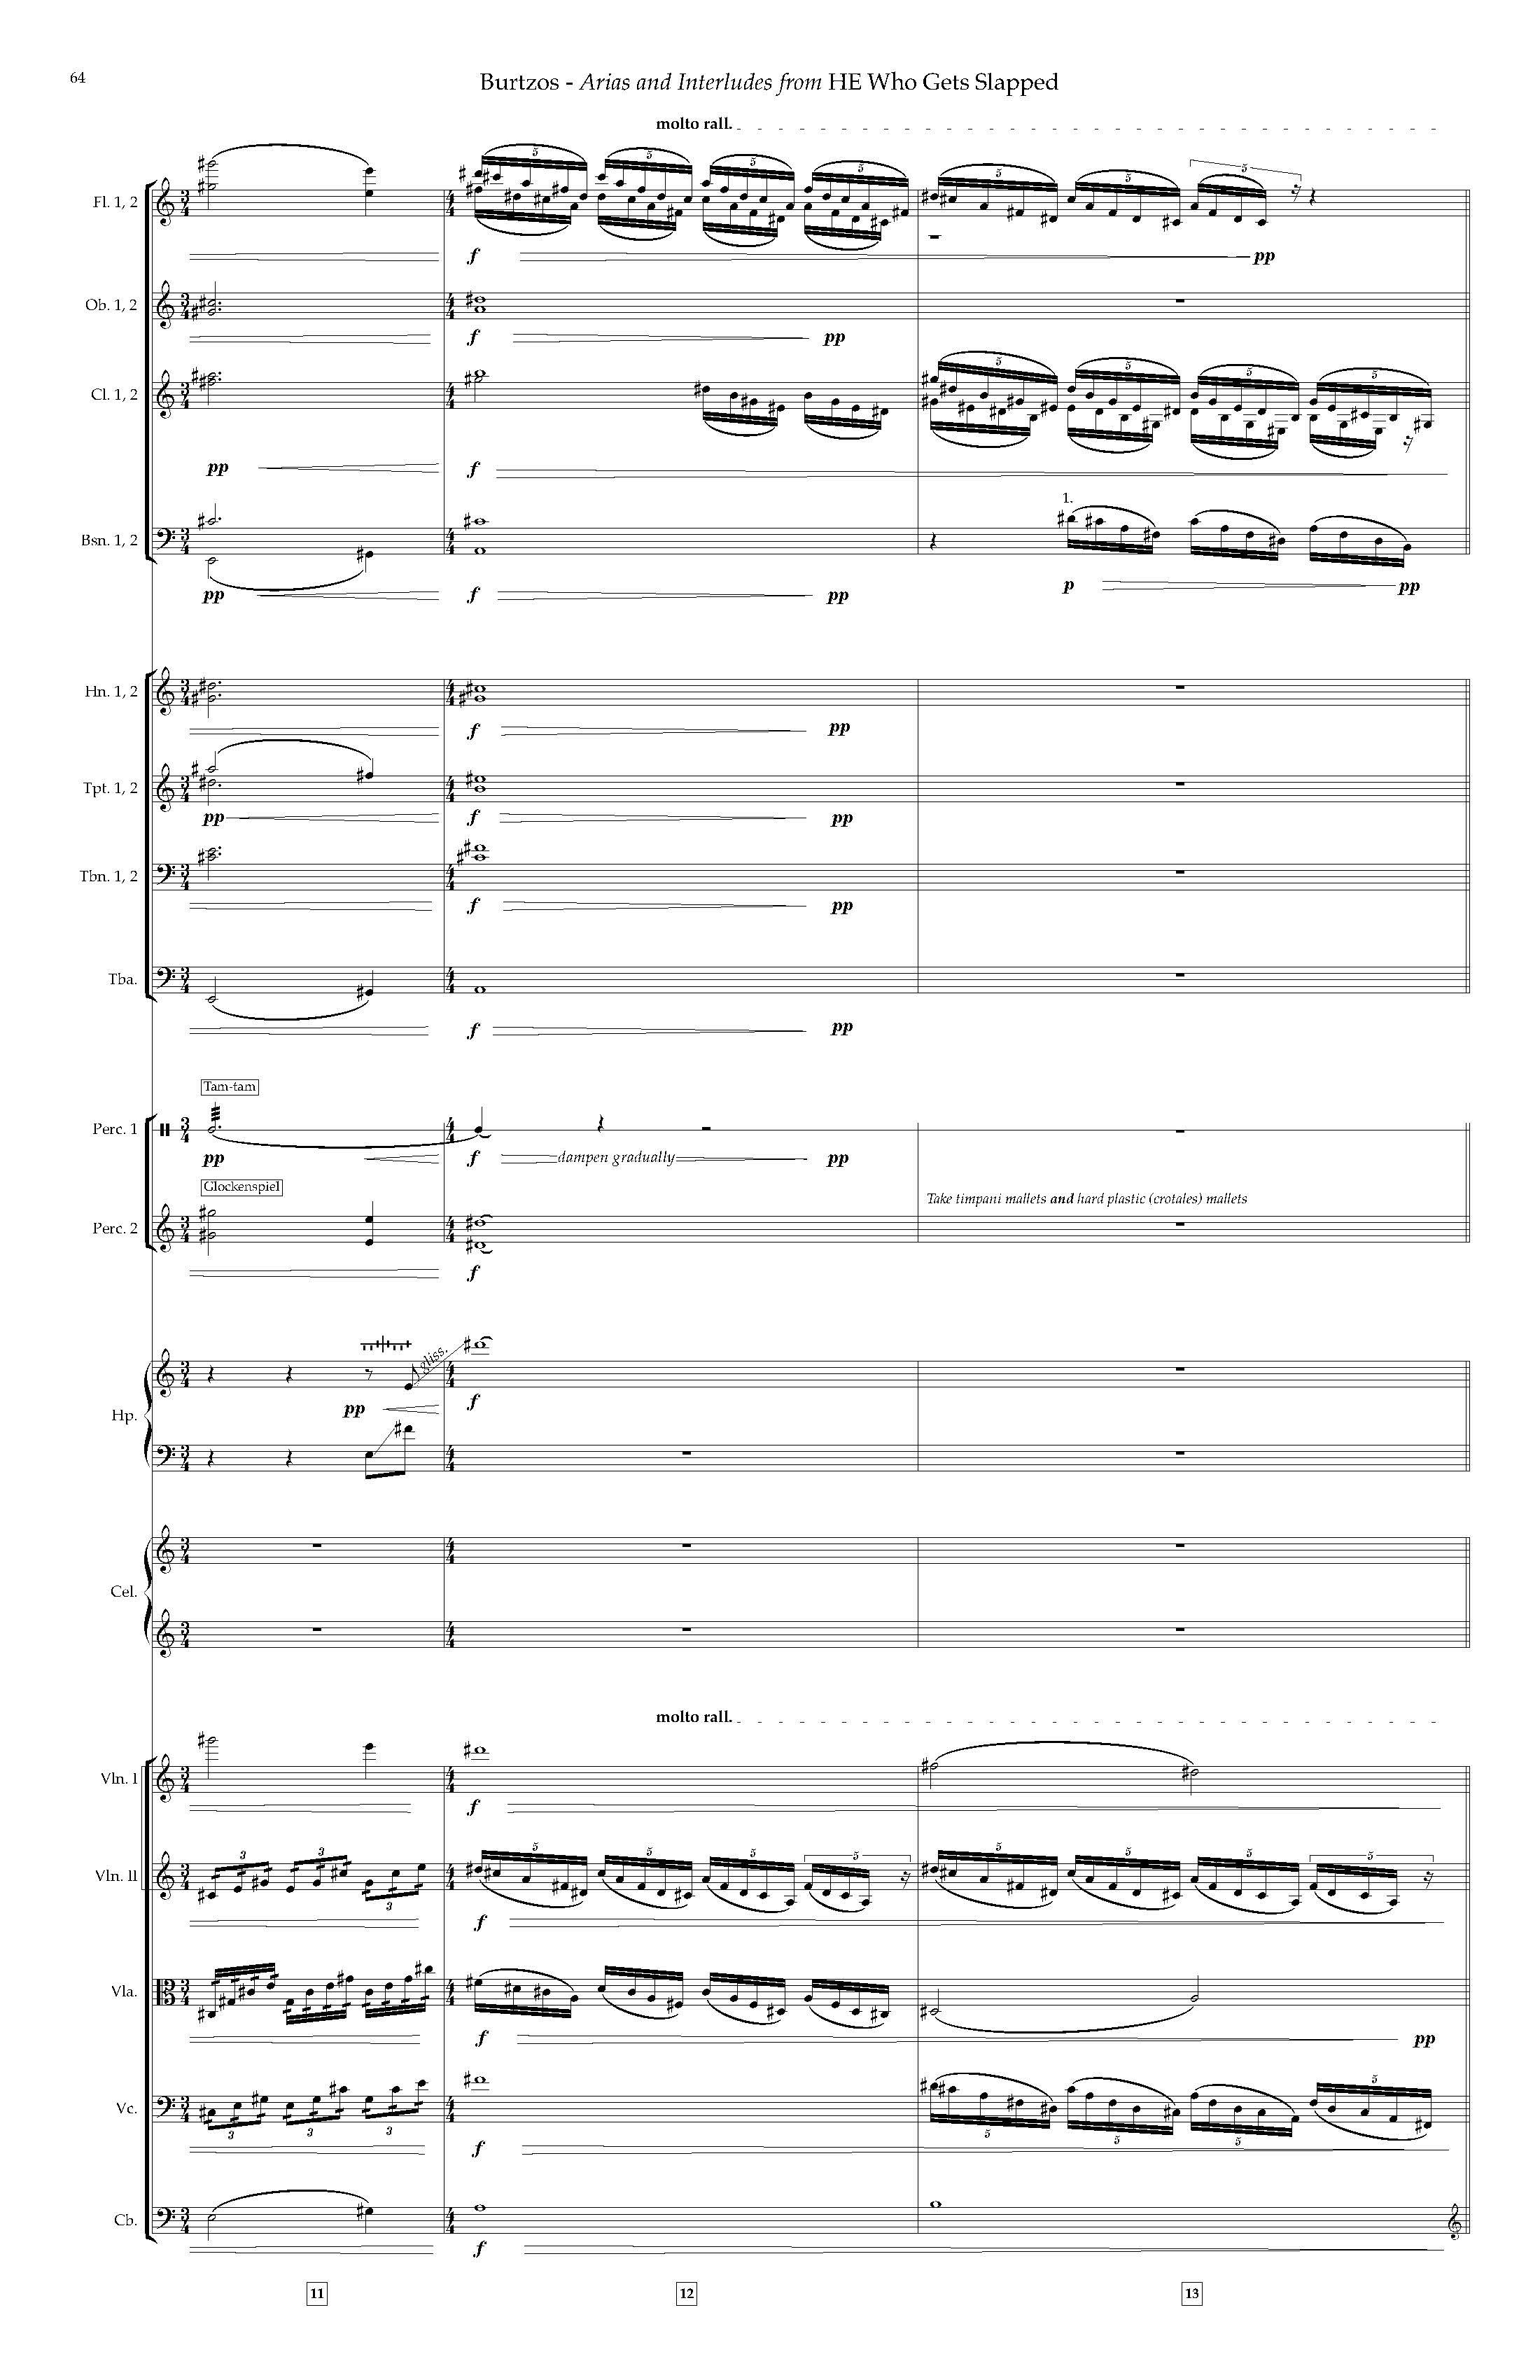 Arias and Interludes from HWGS - Complete Score_Page_70.jpg